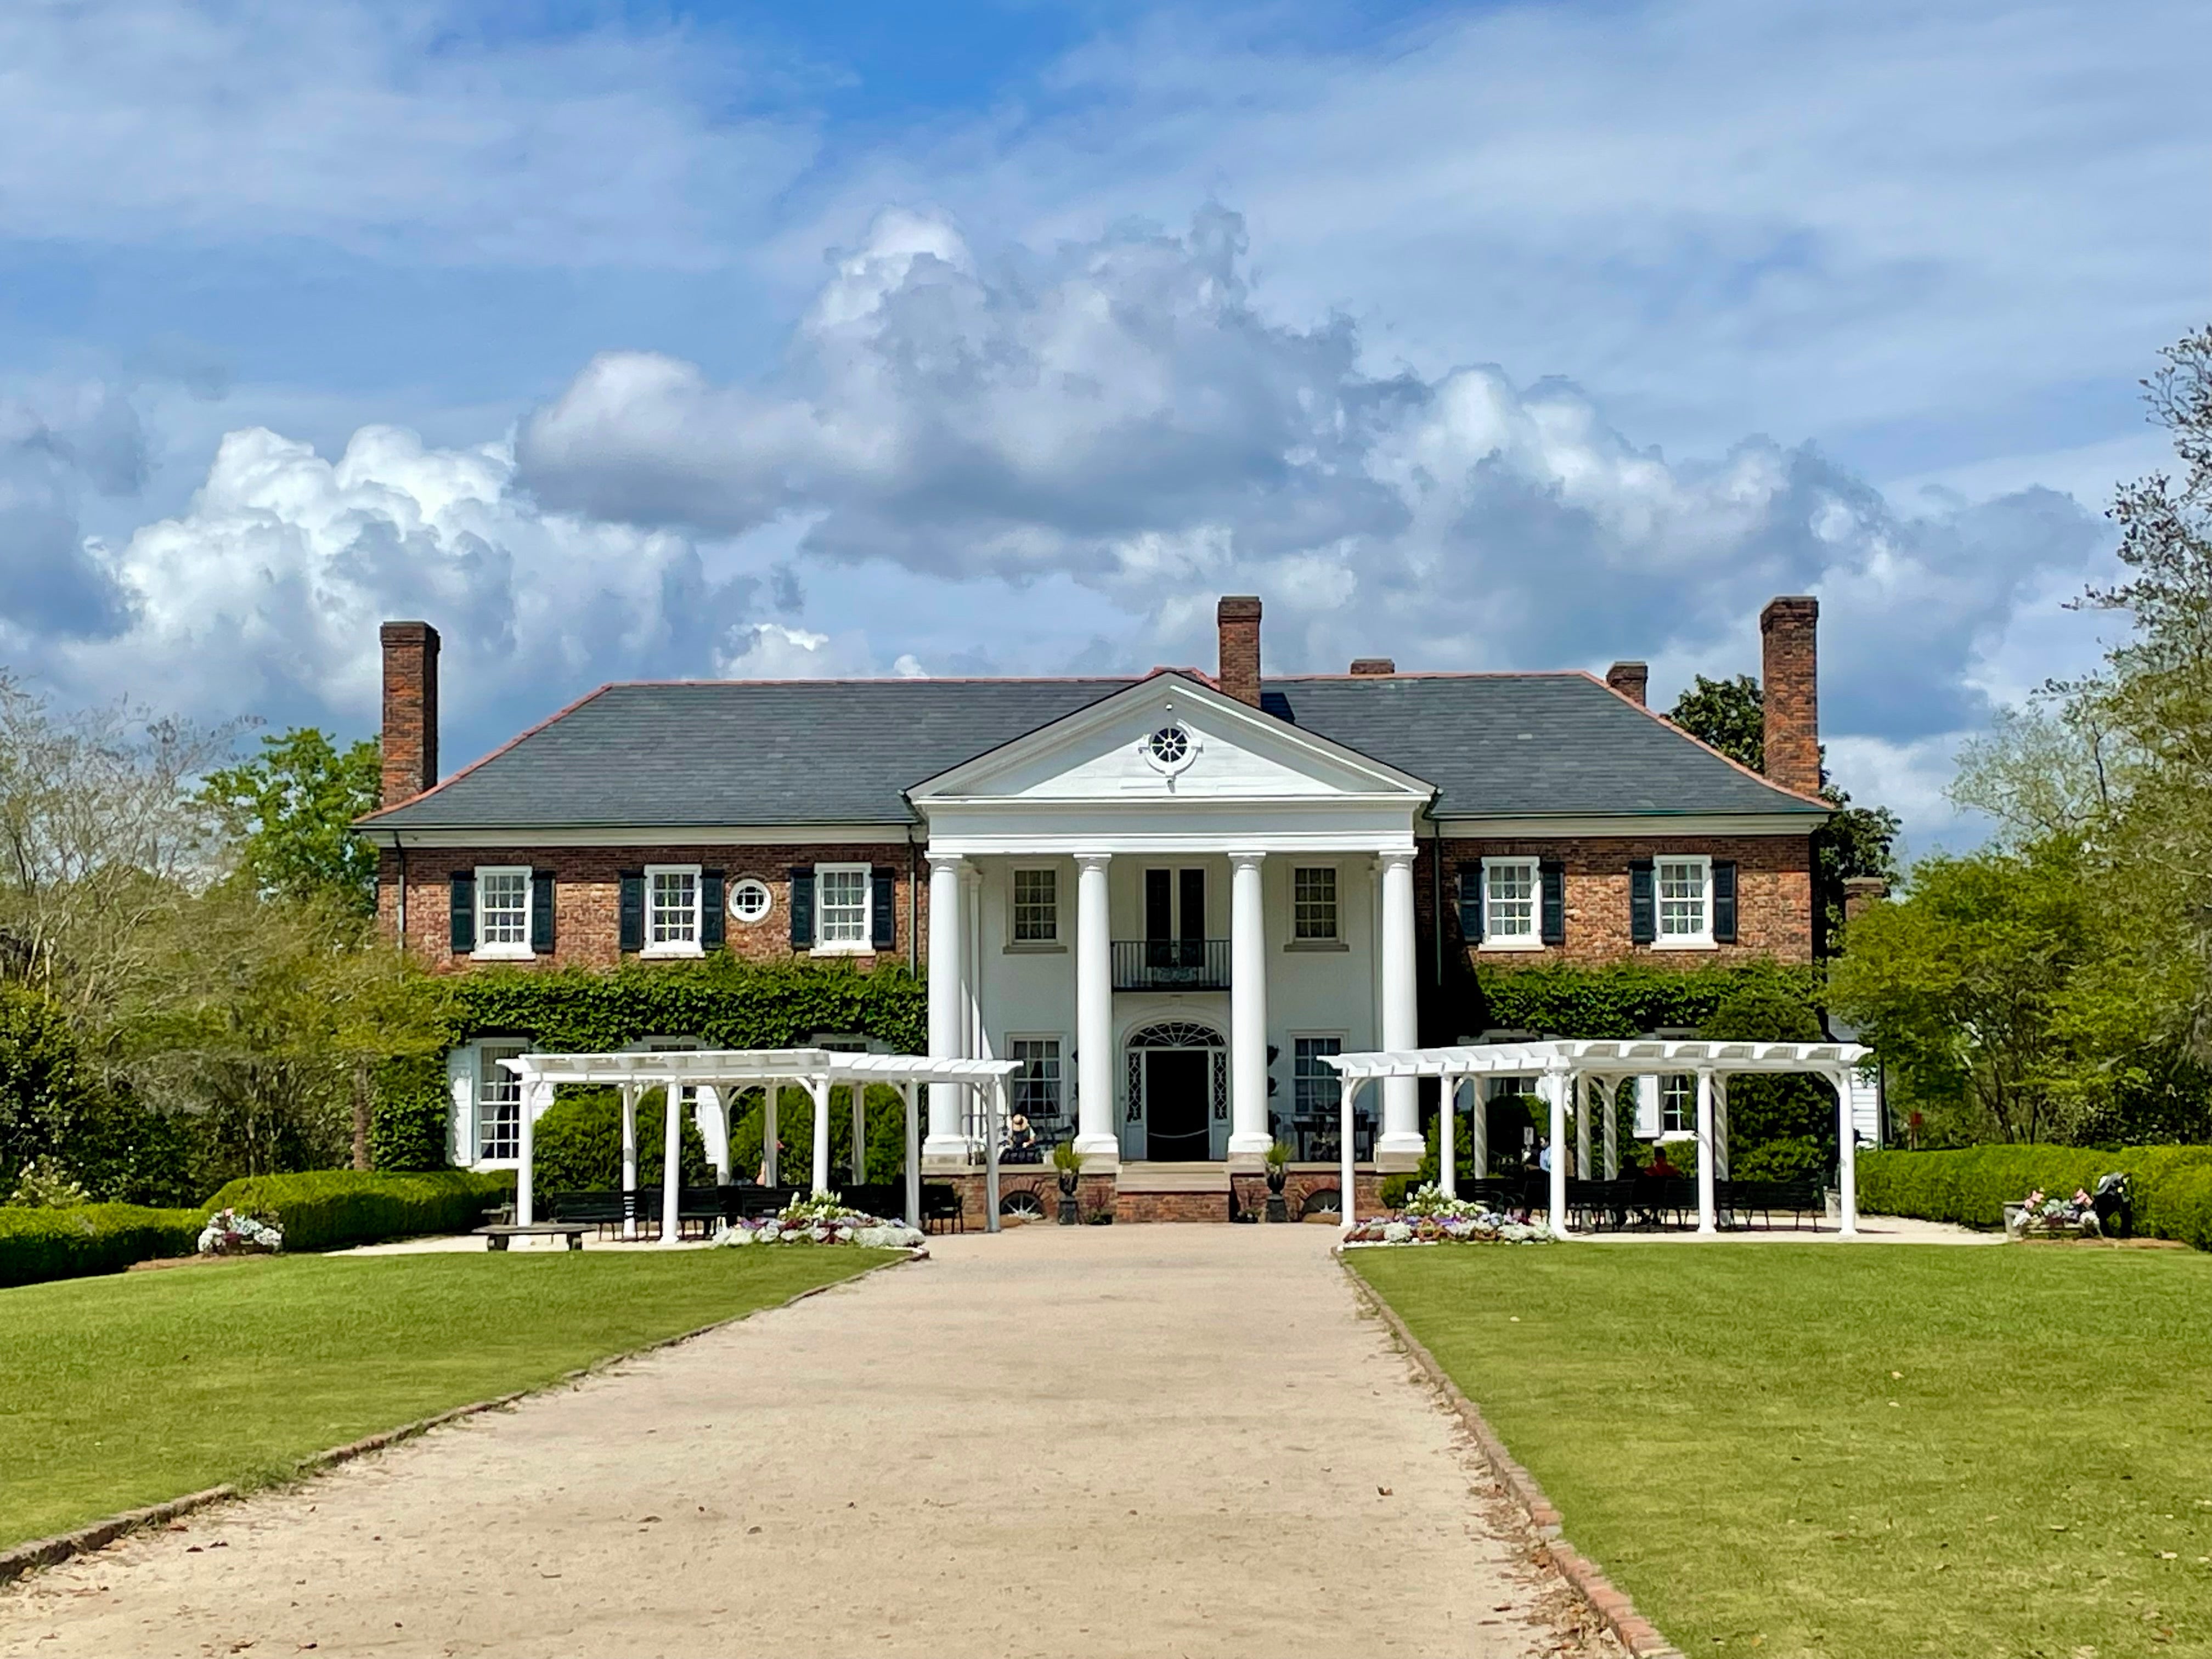 Boone Hall Plantation provided the exteriors for Allie’s parents’ fancy summer house